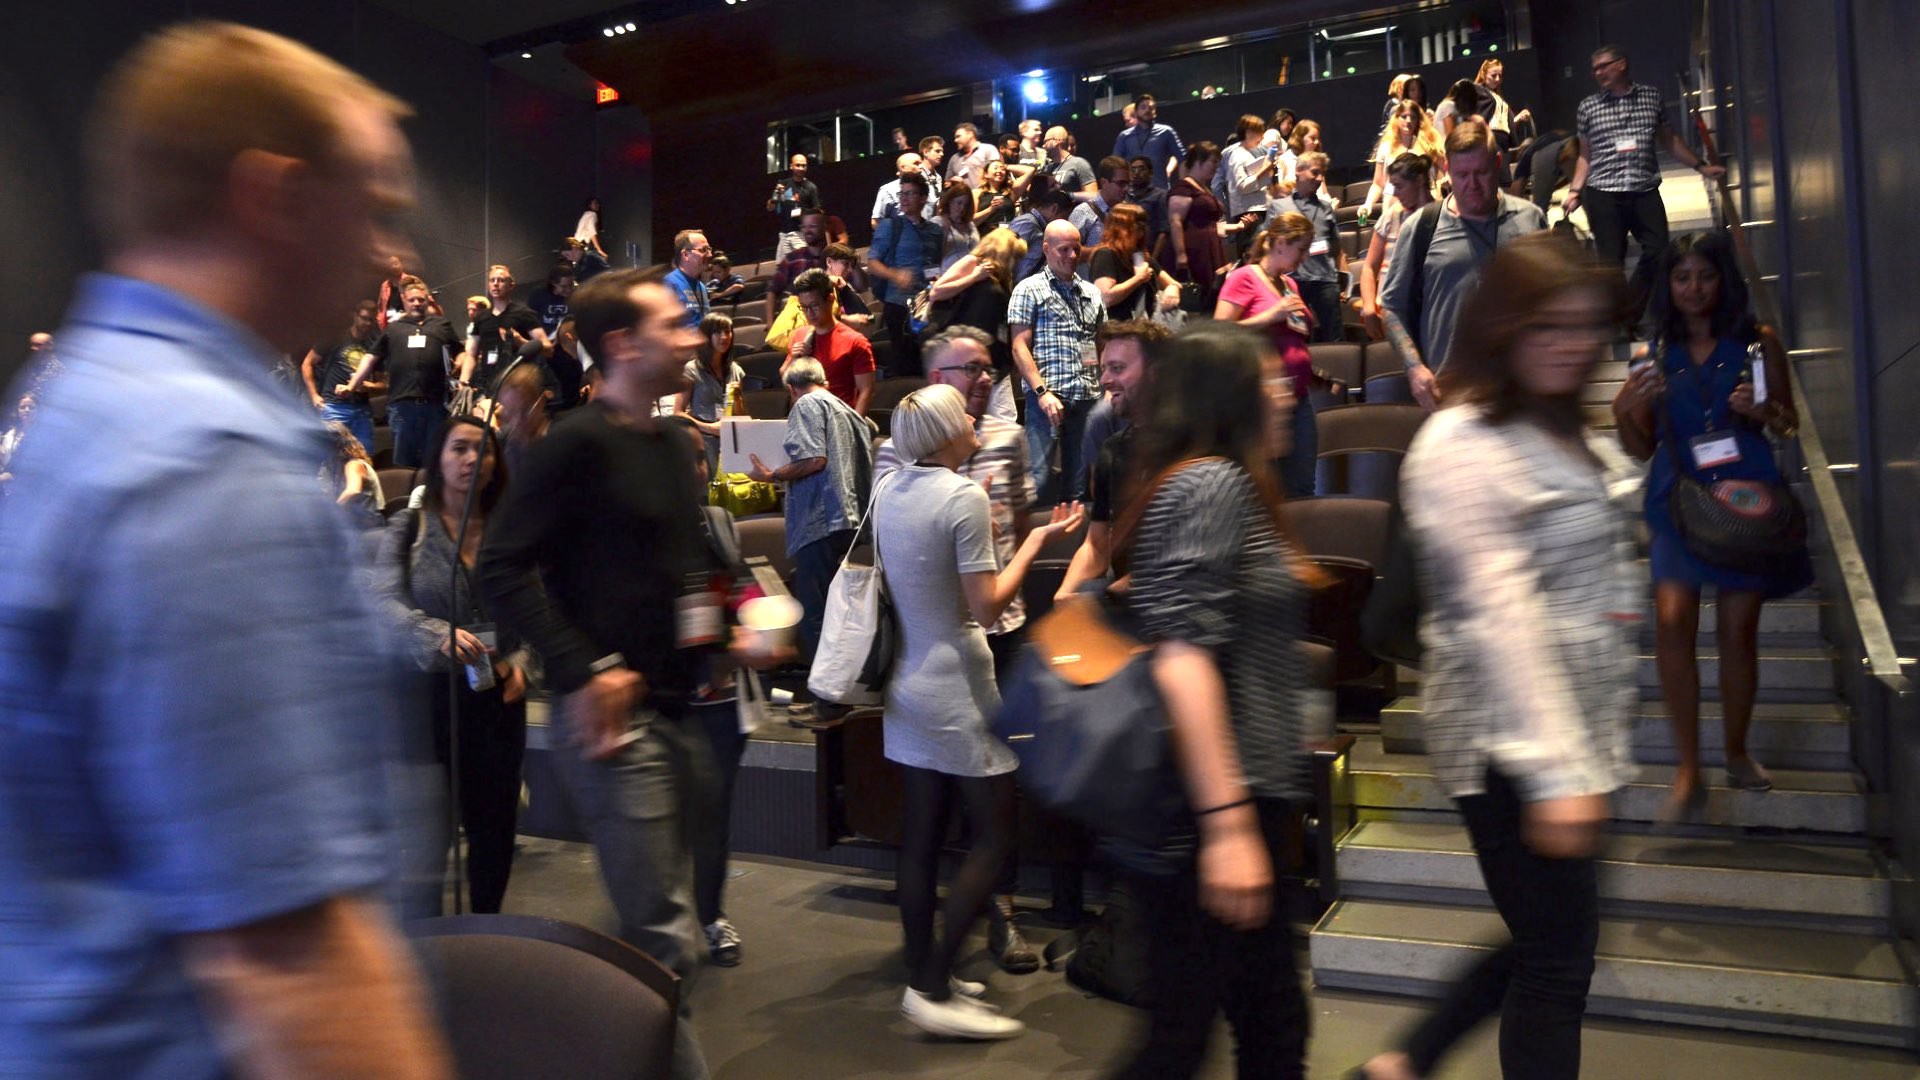 A crowd of people leaving an auditorium